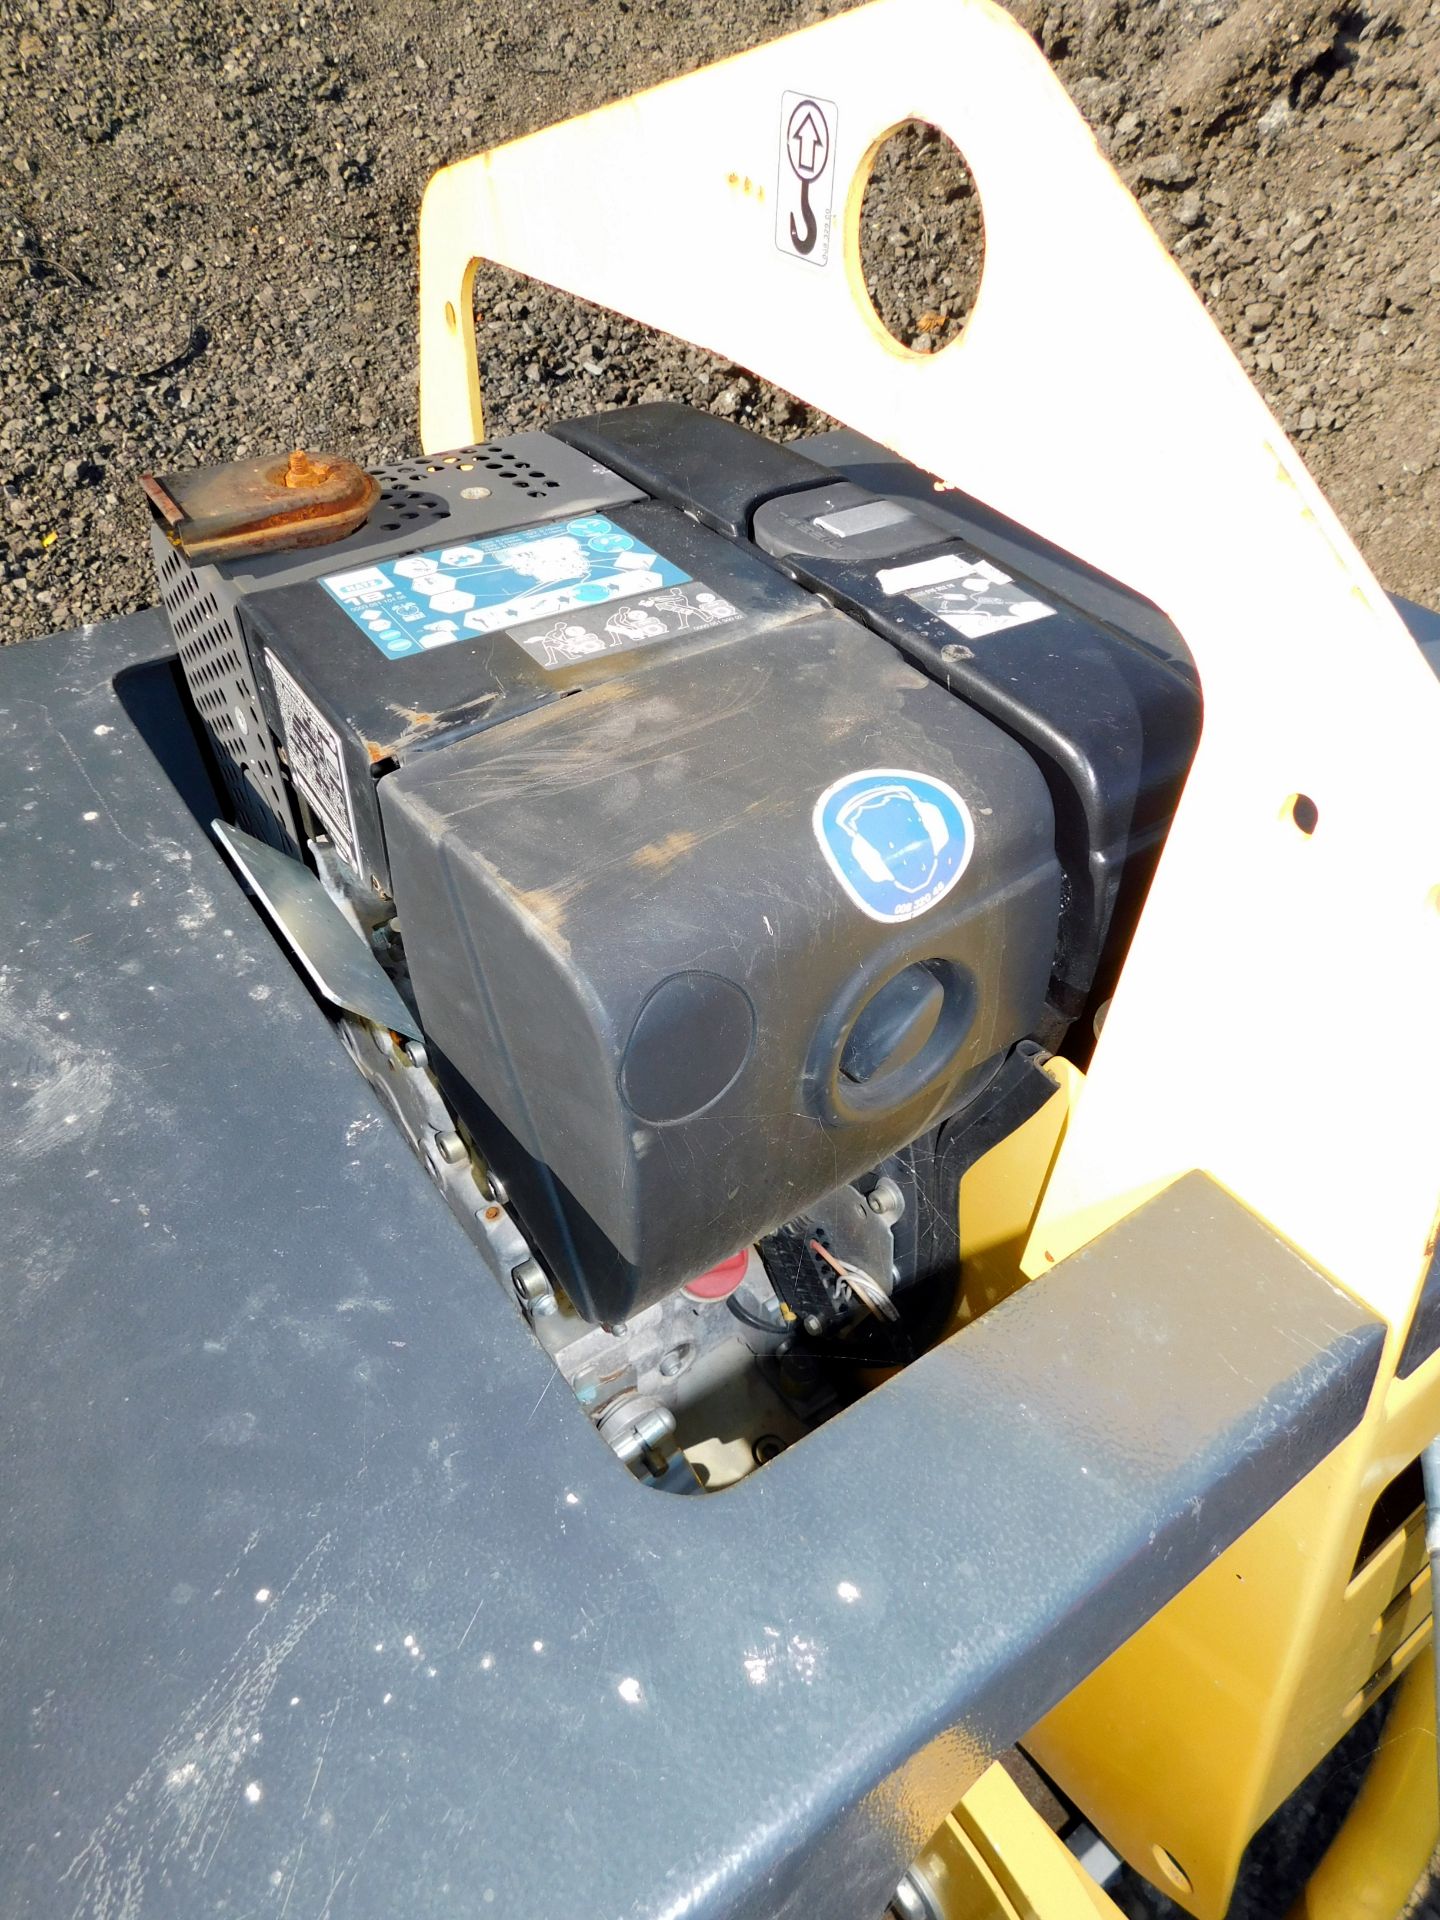 Bomag BW71E–2 Pedestrian Vibratory Roller, serial number 101620291173 (2016) (Located Milton Keynes, - Image 5 of 6